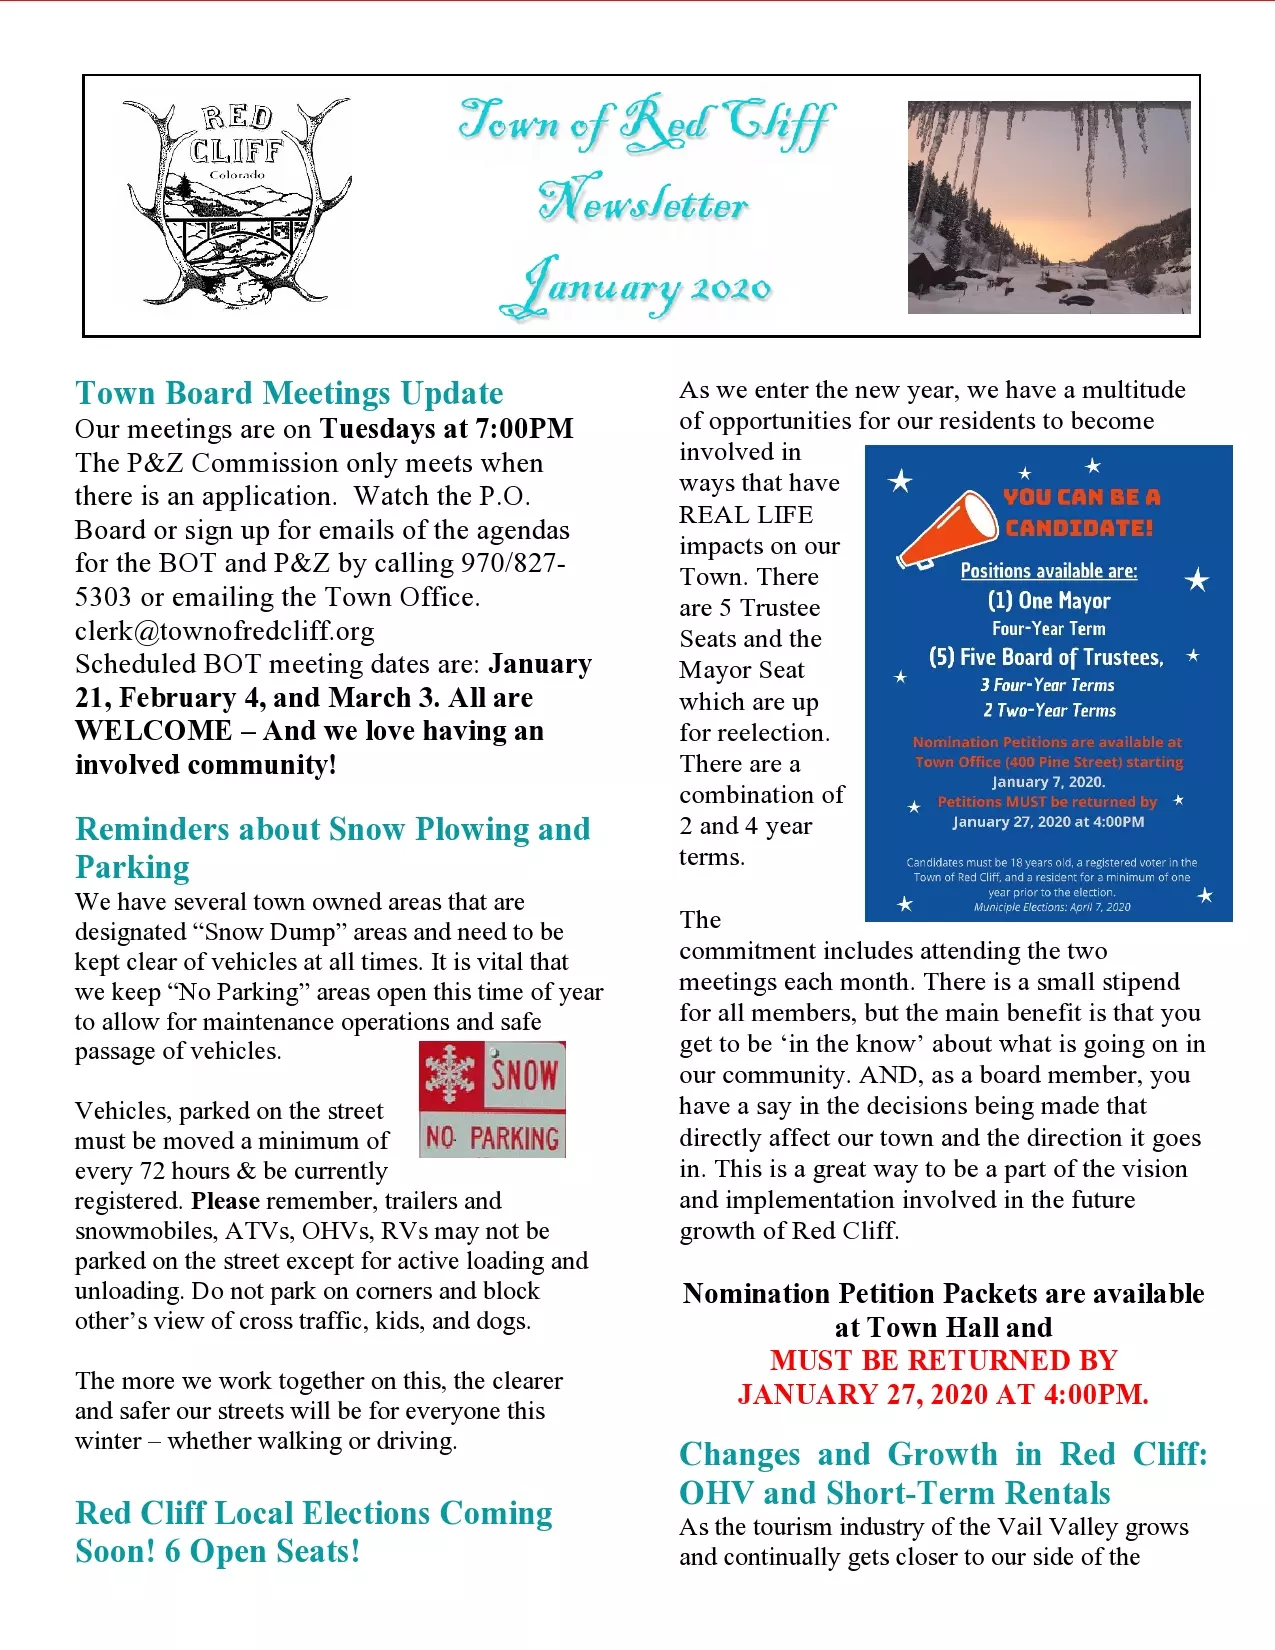 January 2020 Newsletter page 1